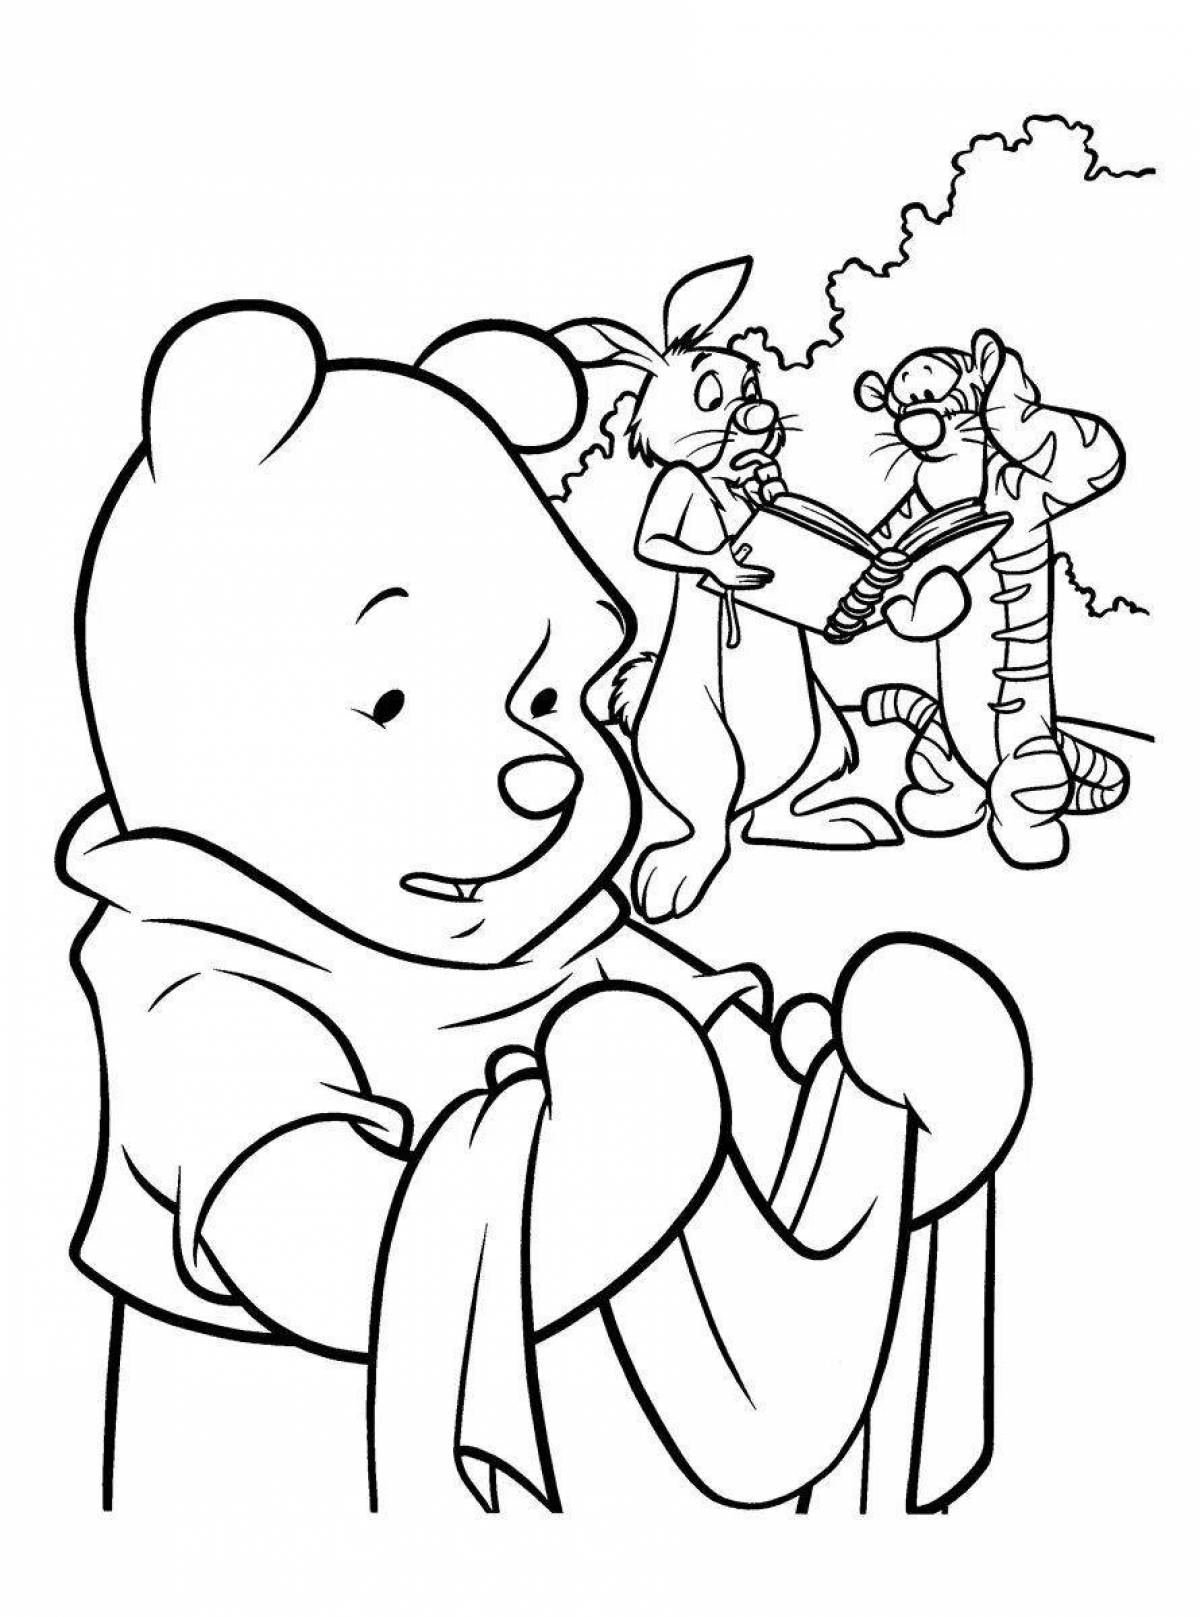 Aababy fun coloring book